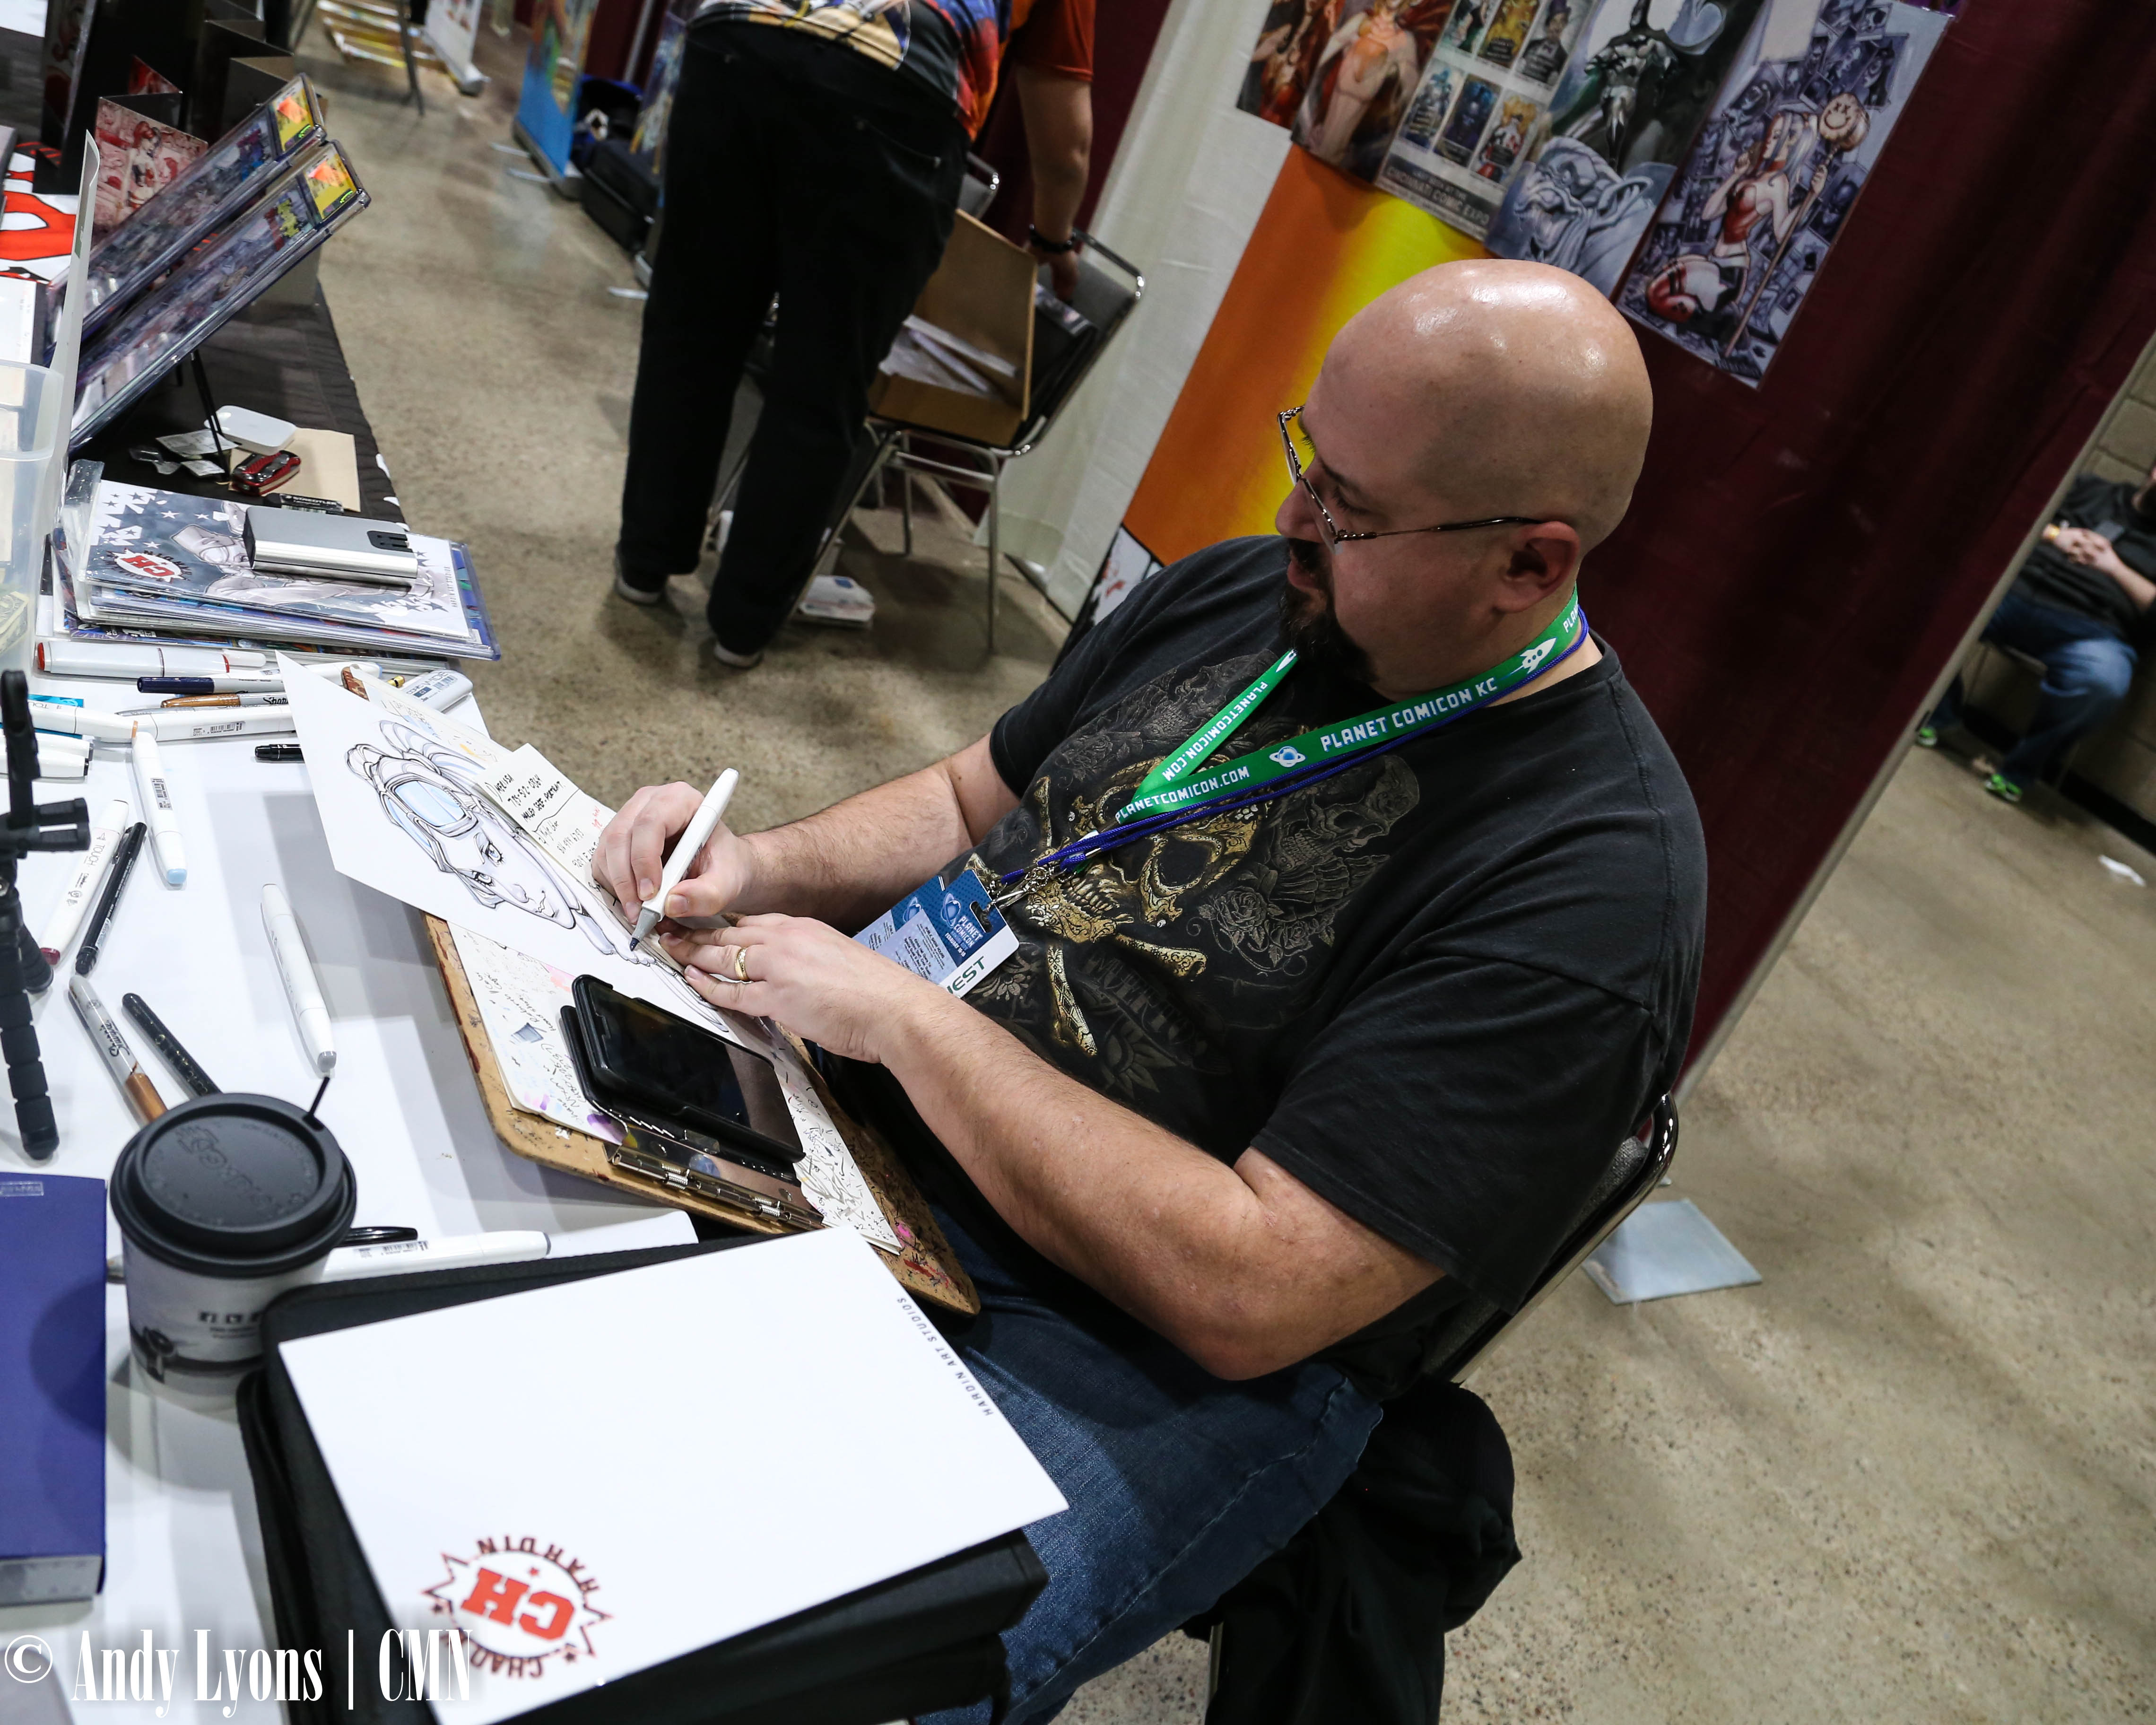 Comic book artist Chad Hardin opens up about “Harley Quinn,” shares plans for “Temerity”